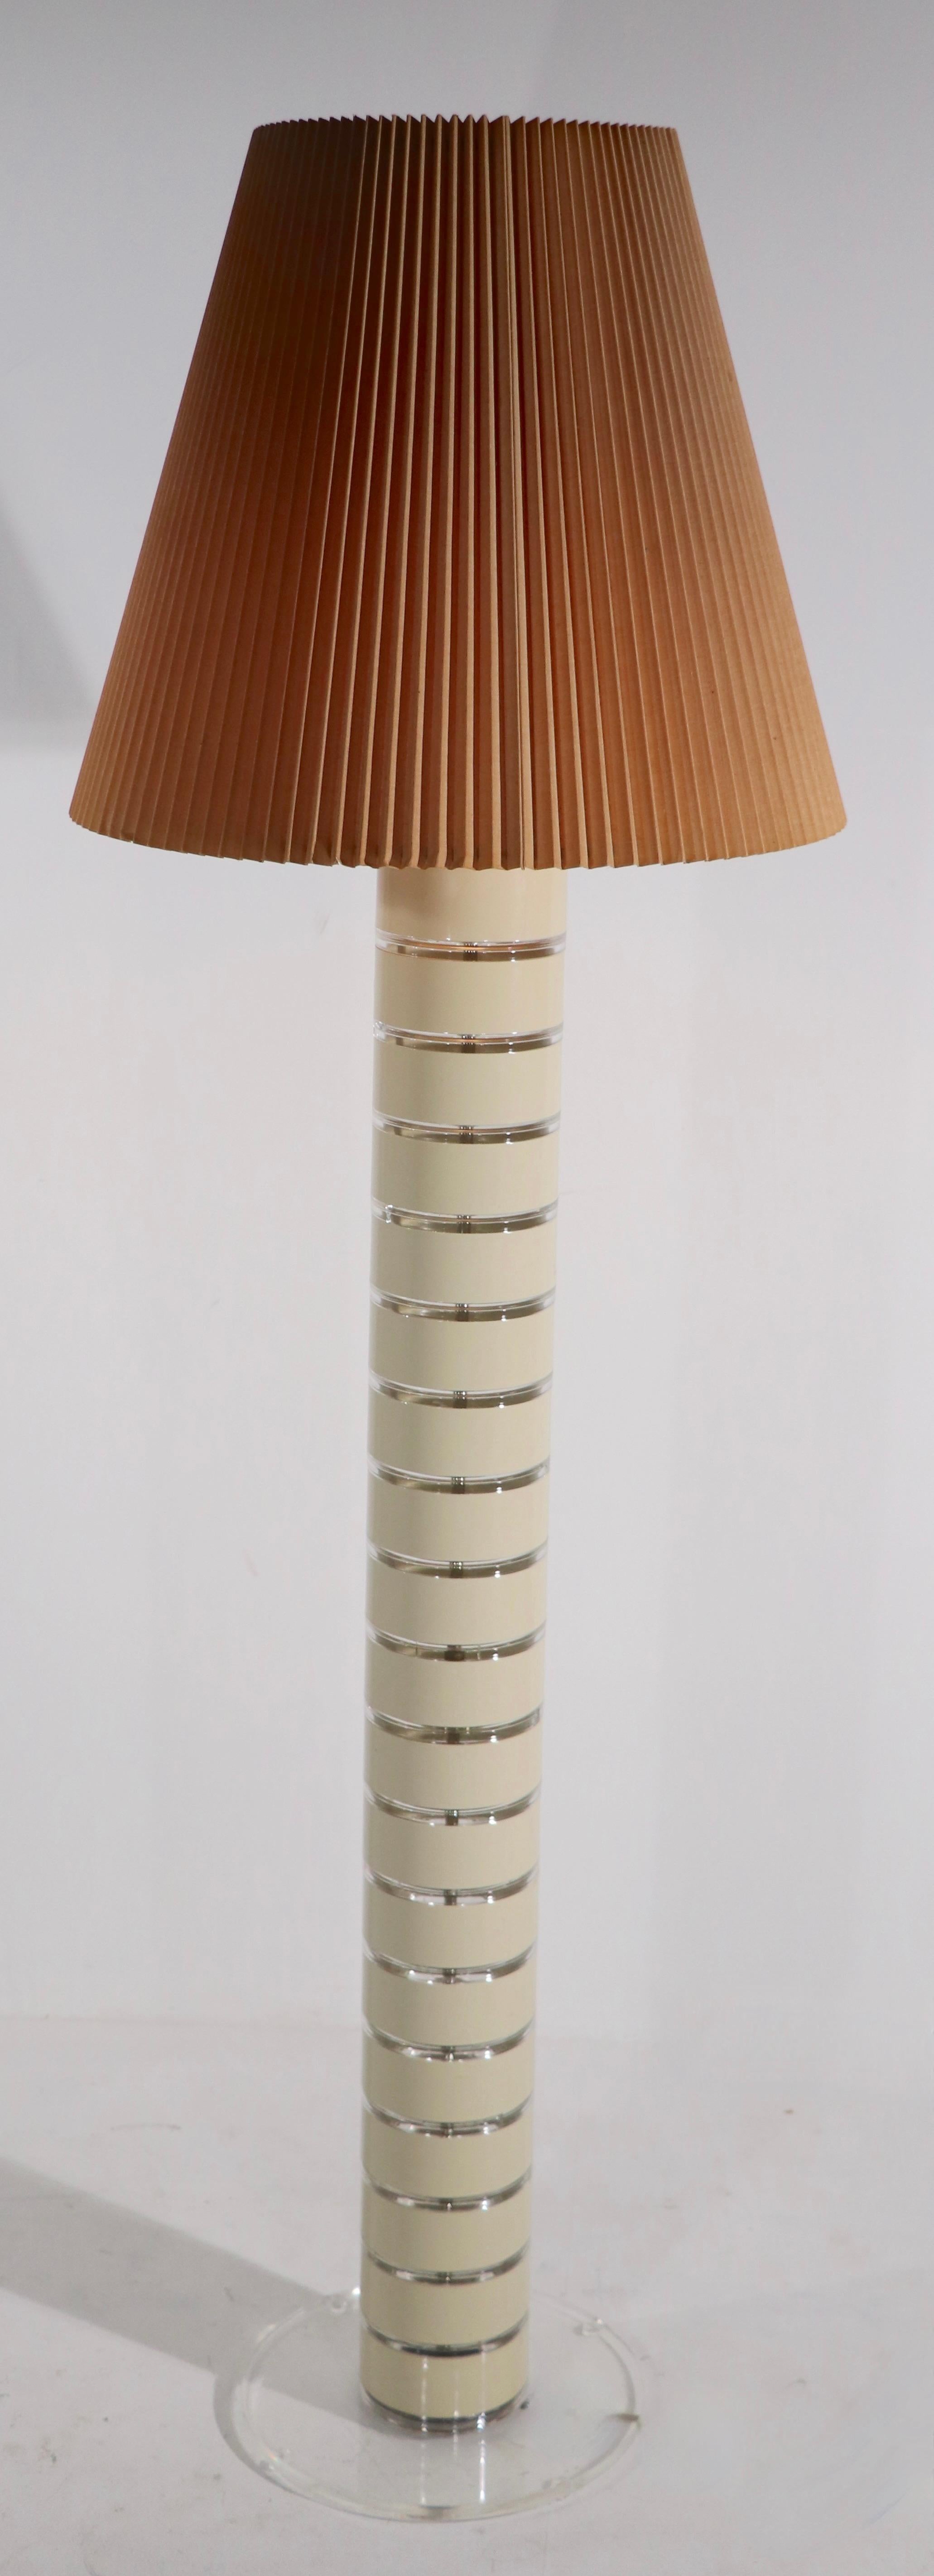 Stacked Lucite Floor Lamp by Optique 5